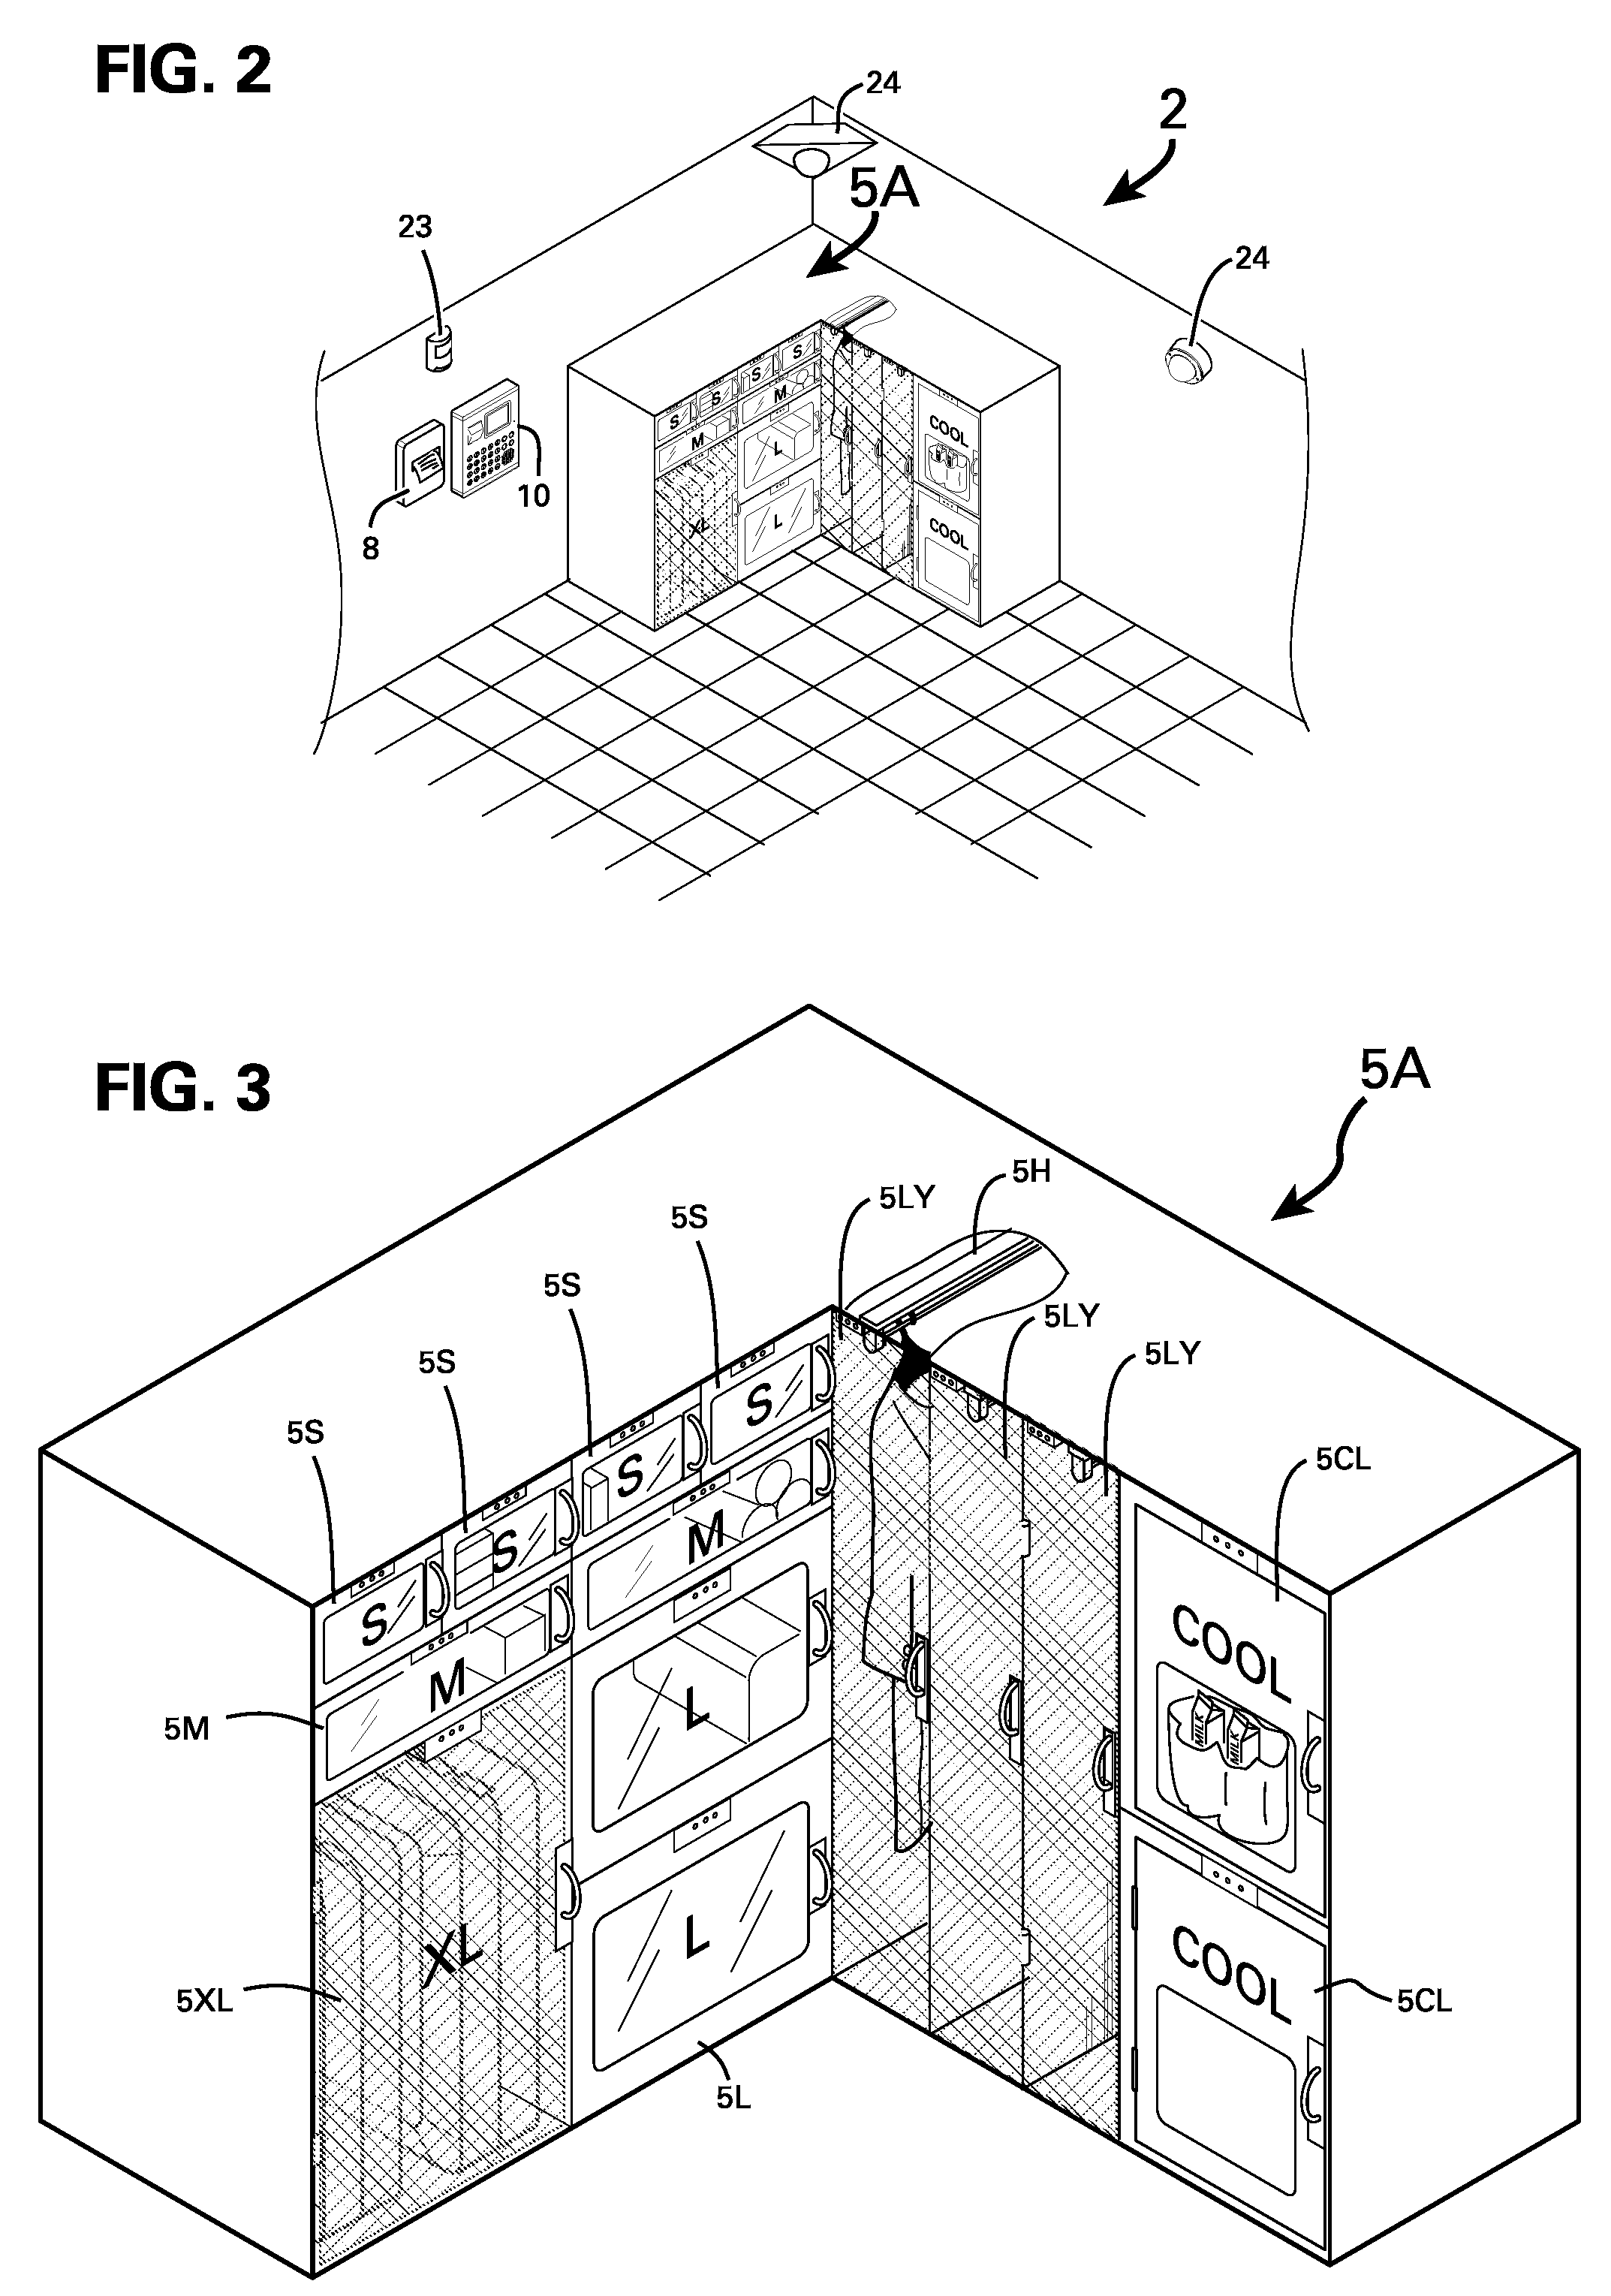 Method and apparatus for connecting and operating lockers for home deliveries via video interphones and remotely via a virtual doorman